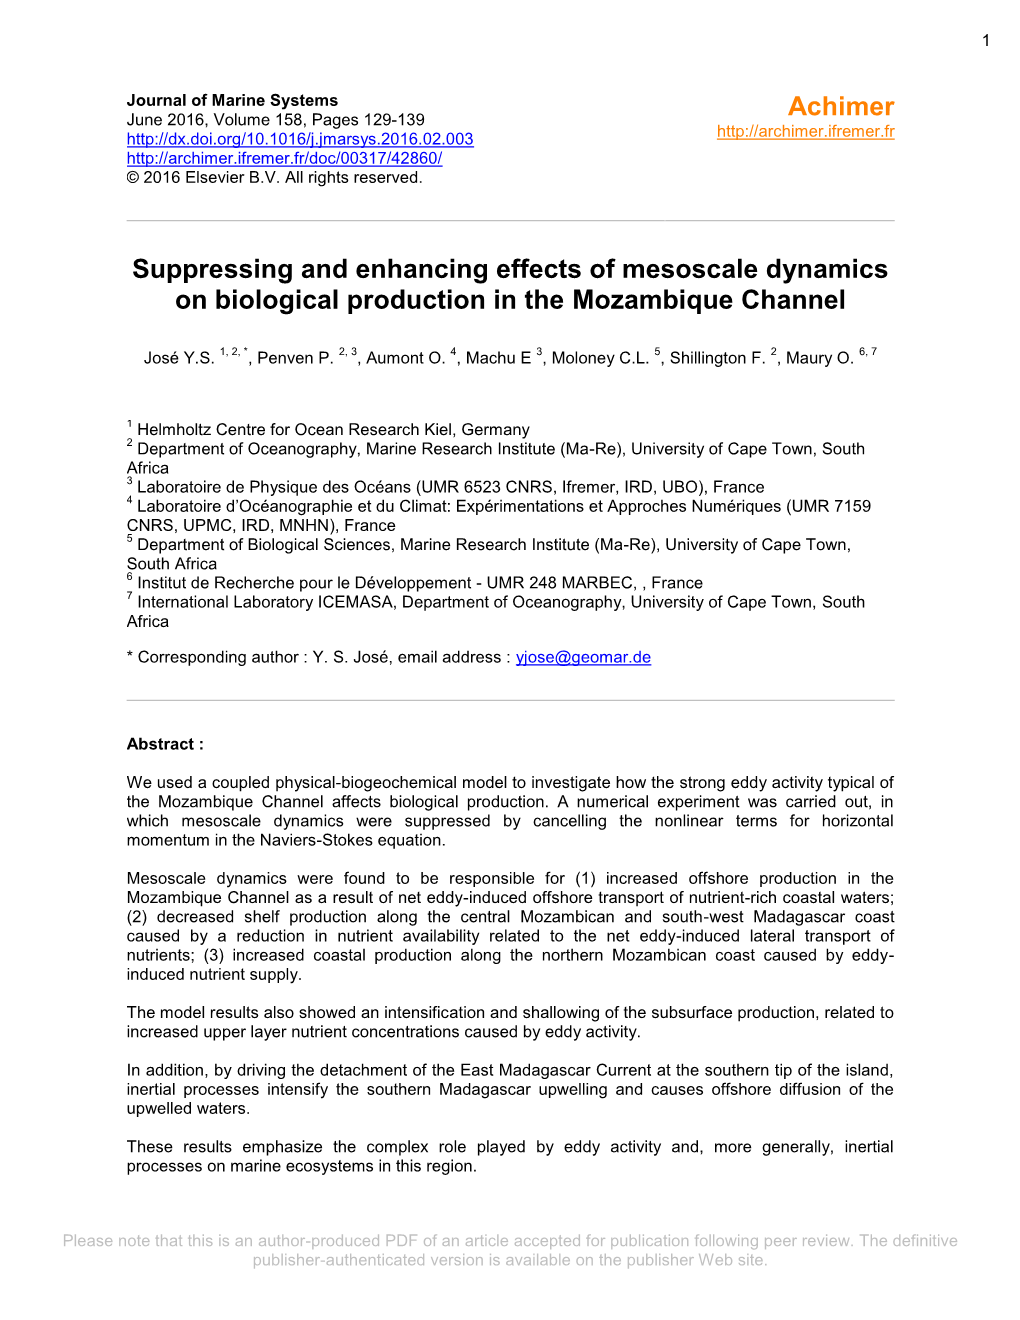 Suppressing and Enhancing Effects of Mesoscale Dynamics on Biological Production in the Mozambique Channel